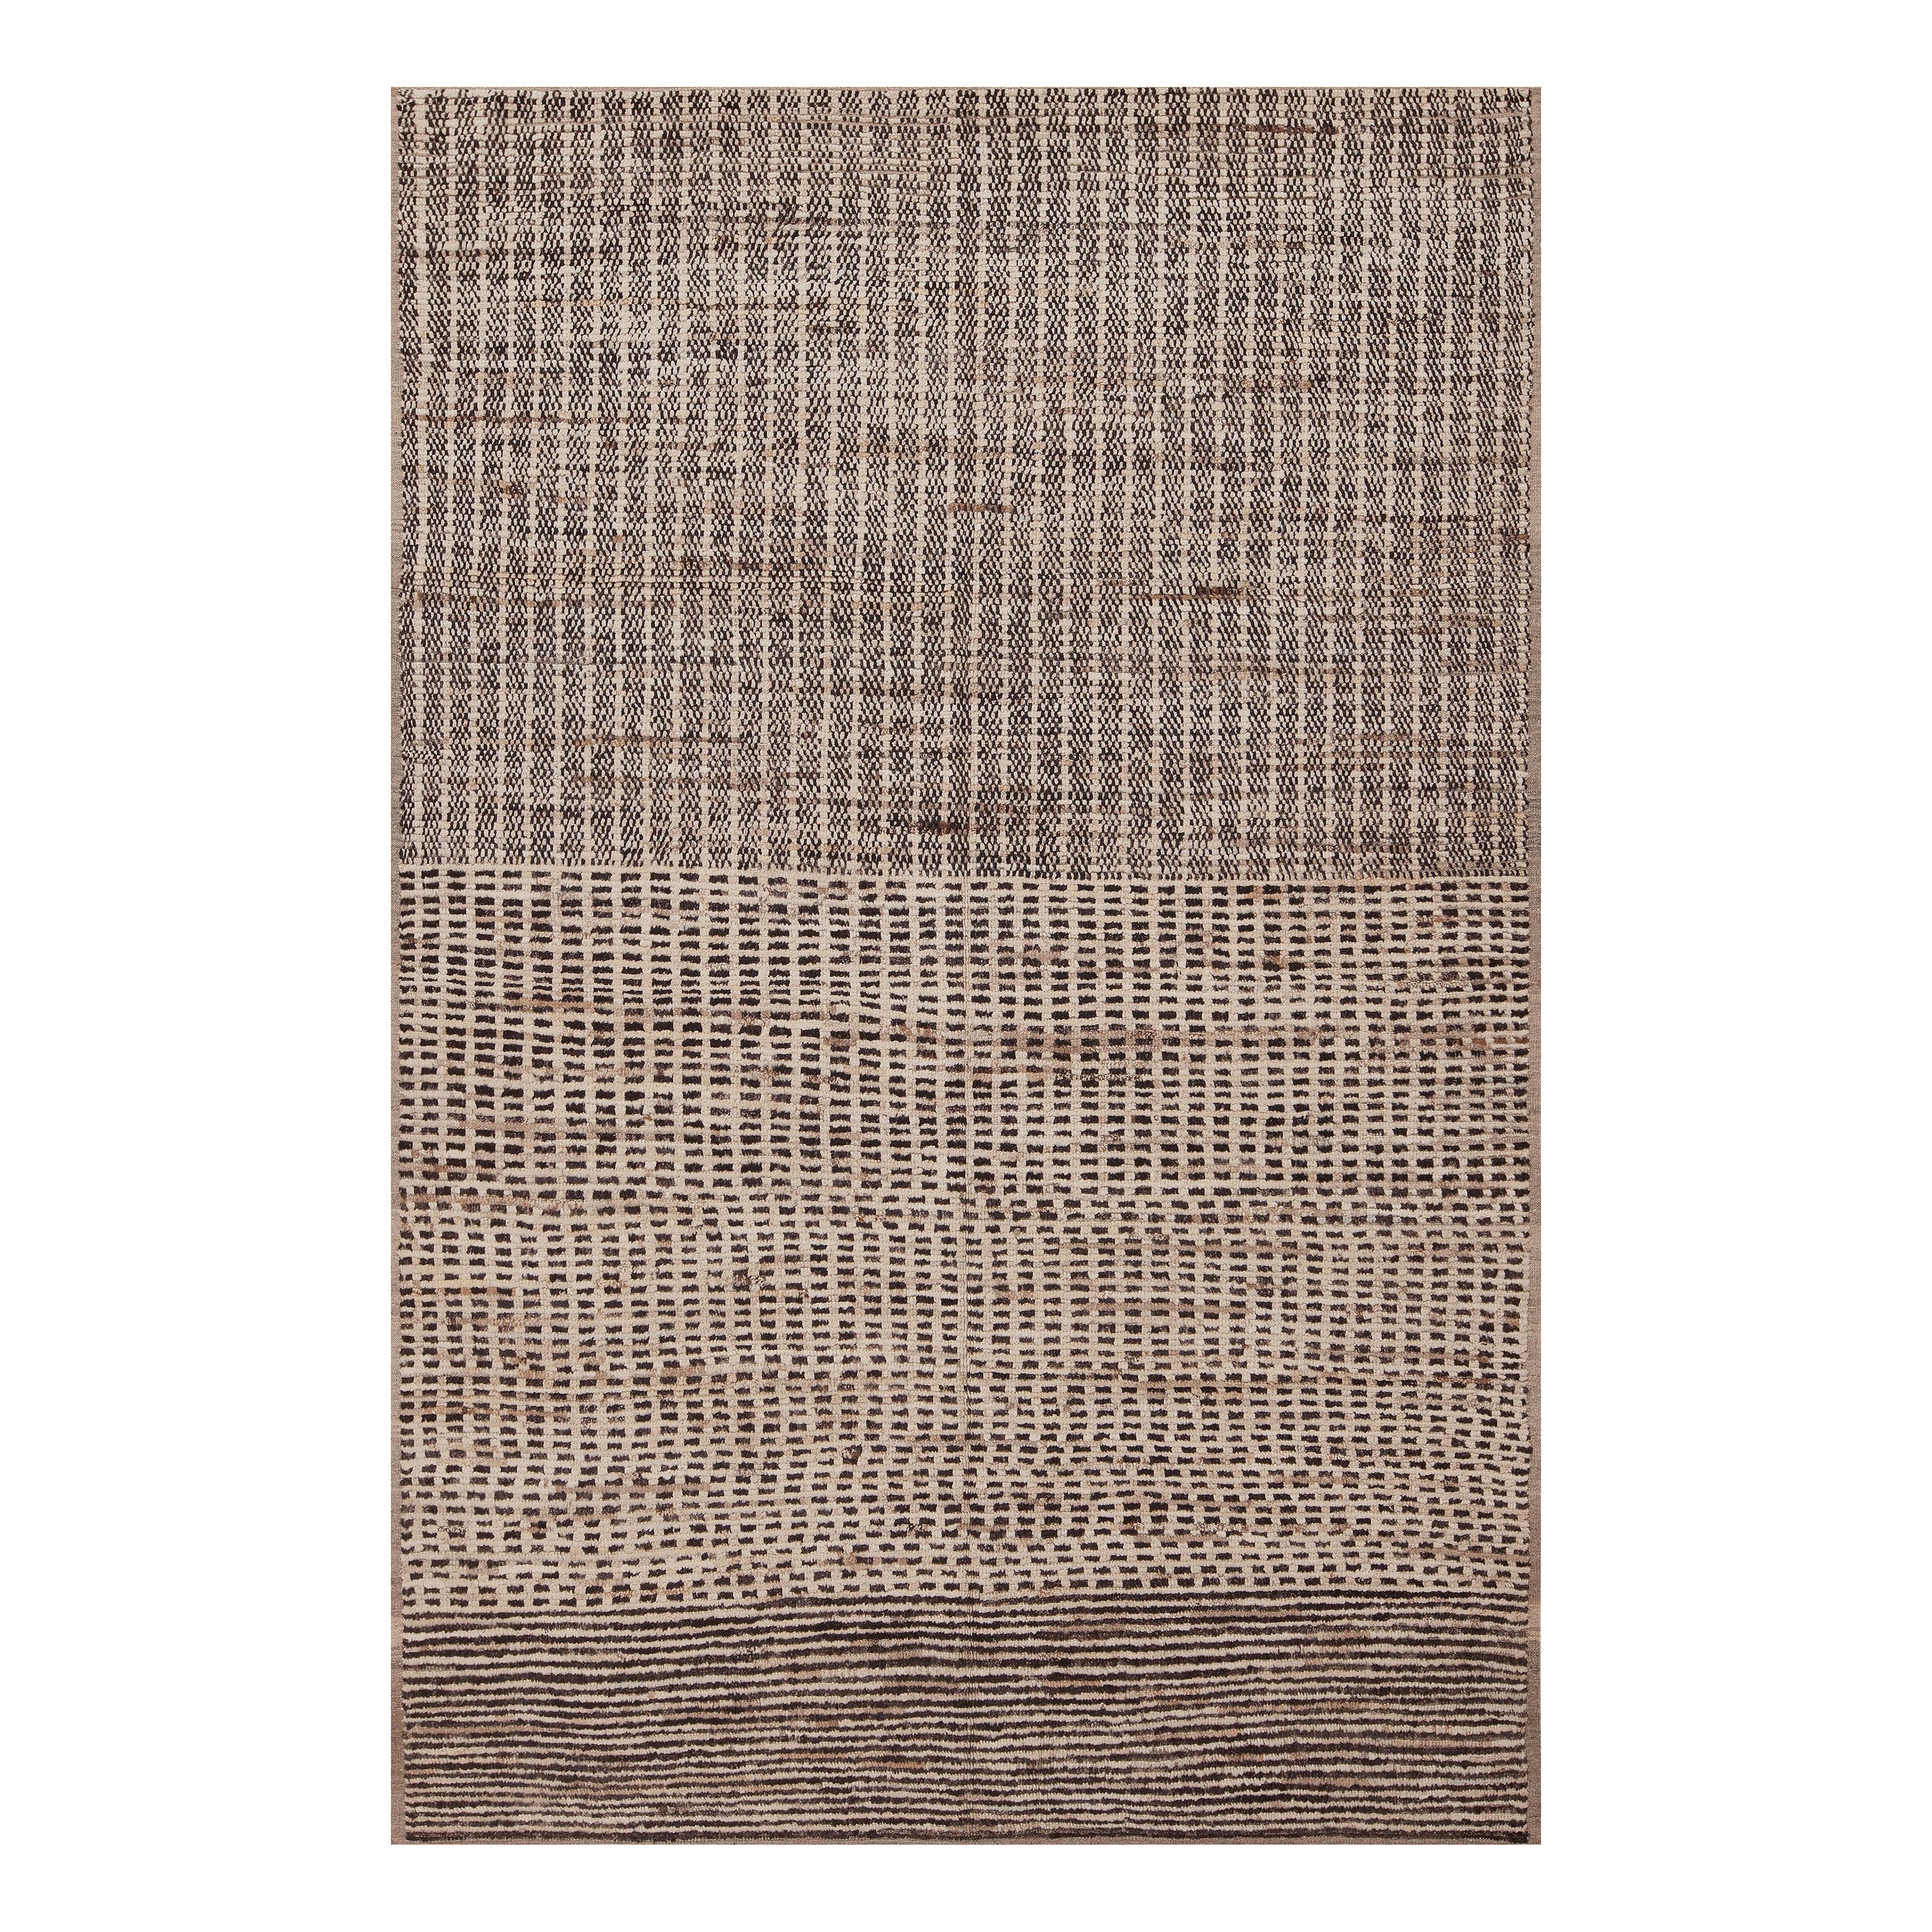 Nazmiyal Collection Elegant Abstract Primitive Modern Area Rug 6'2' x 8'11" For Sale